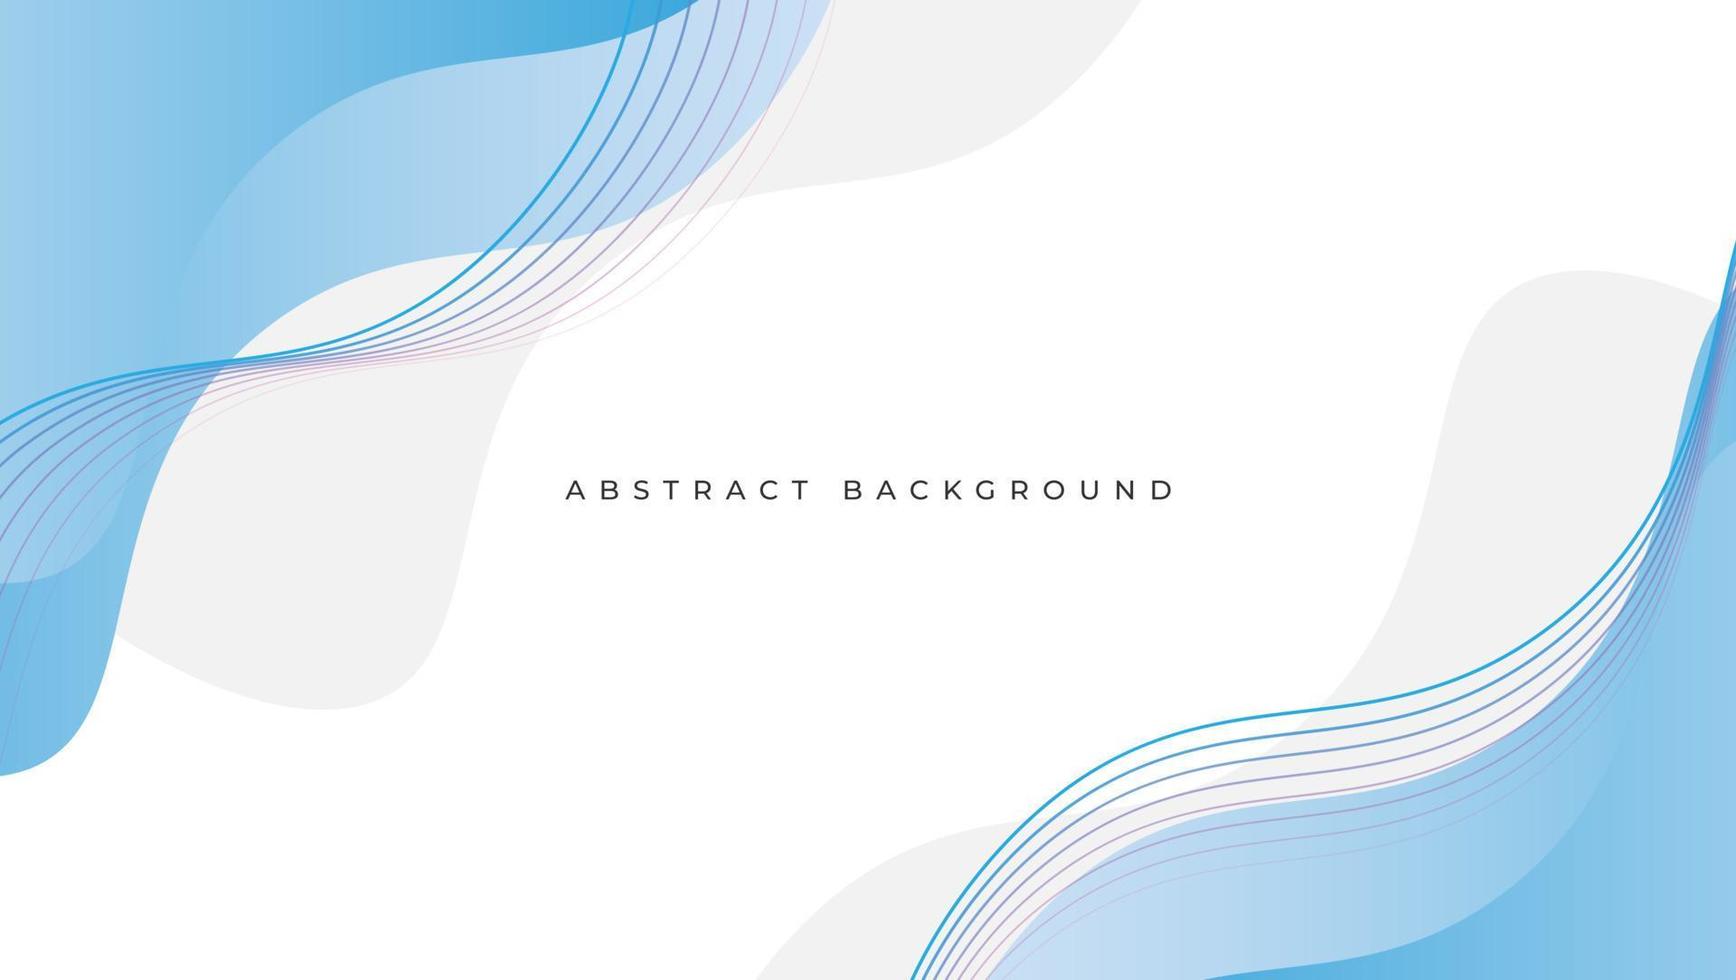 Abstract background with blue and white lines. Vector illustration for your design